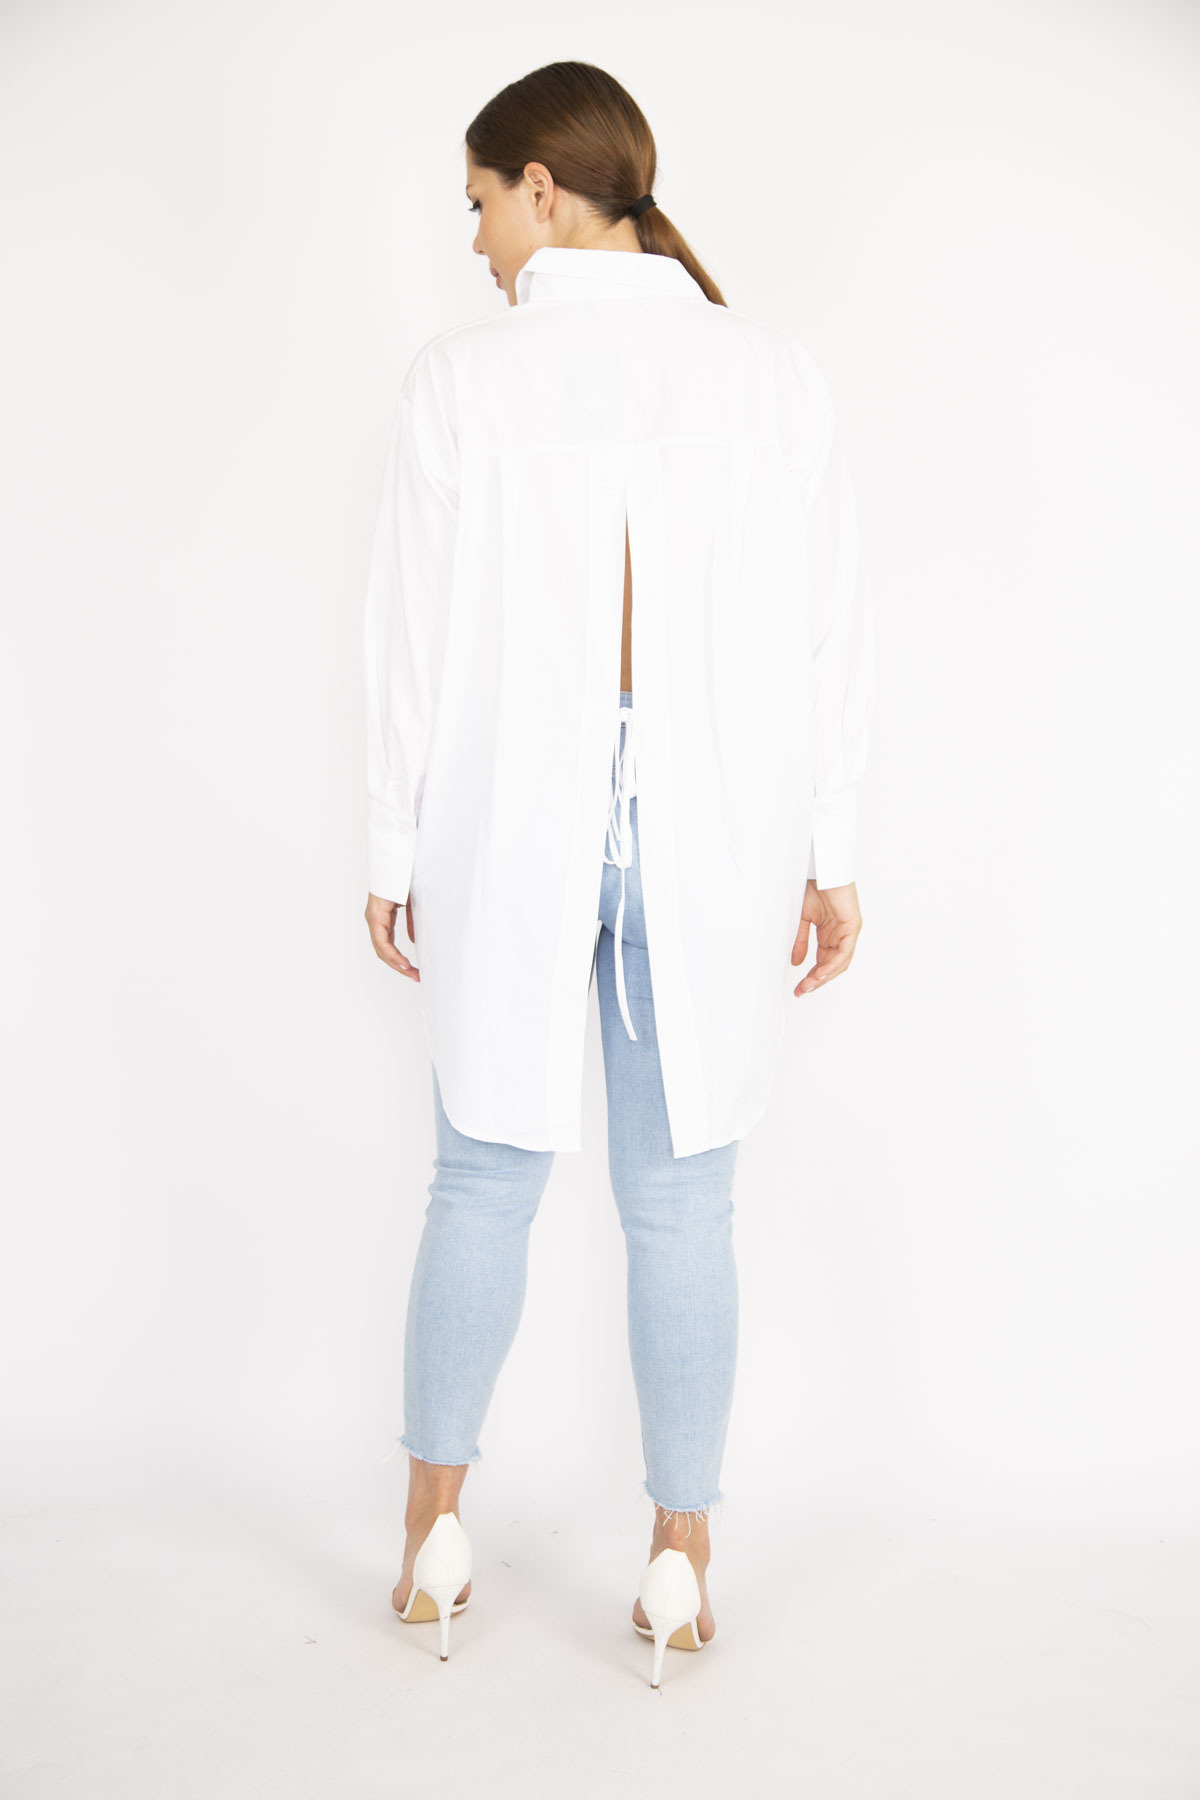 Levně Şans Women's Plus Size White Shirt with a slit and lace detail in the back and front button down